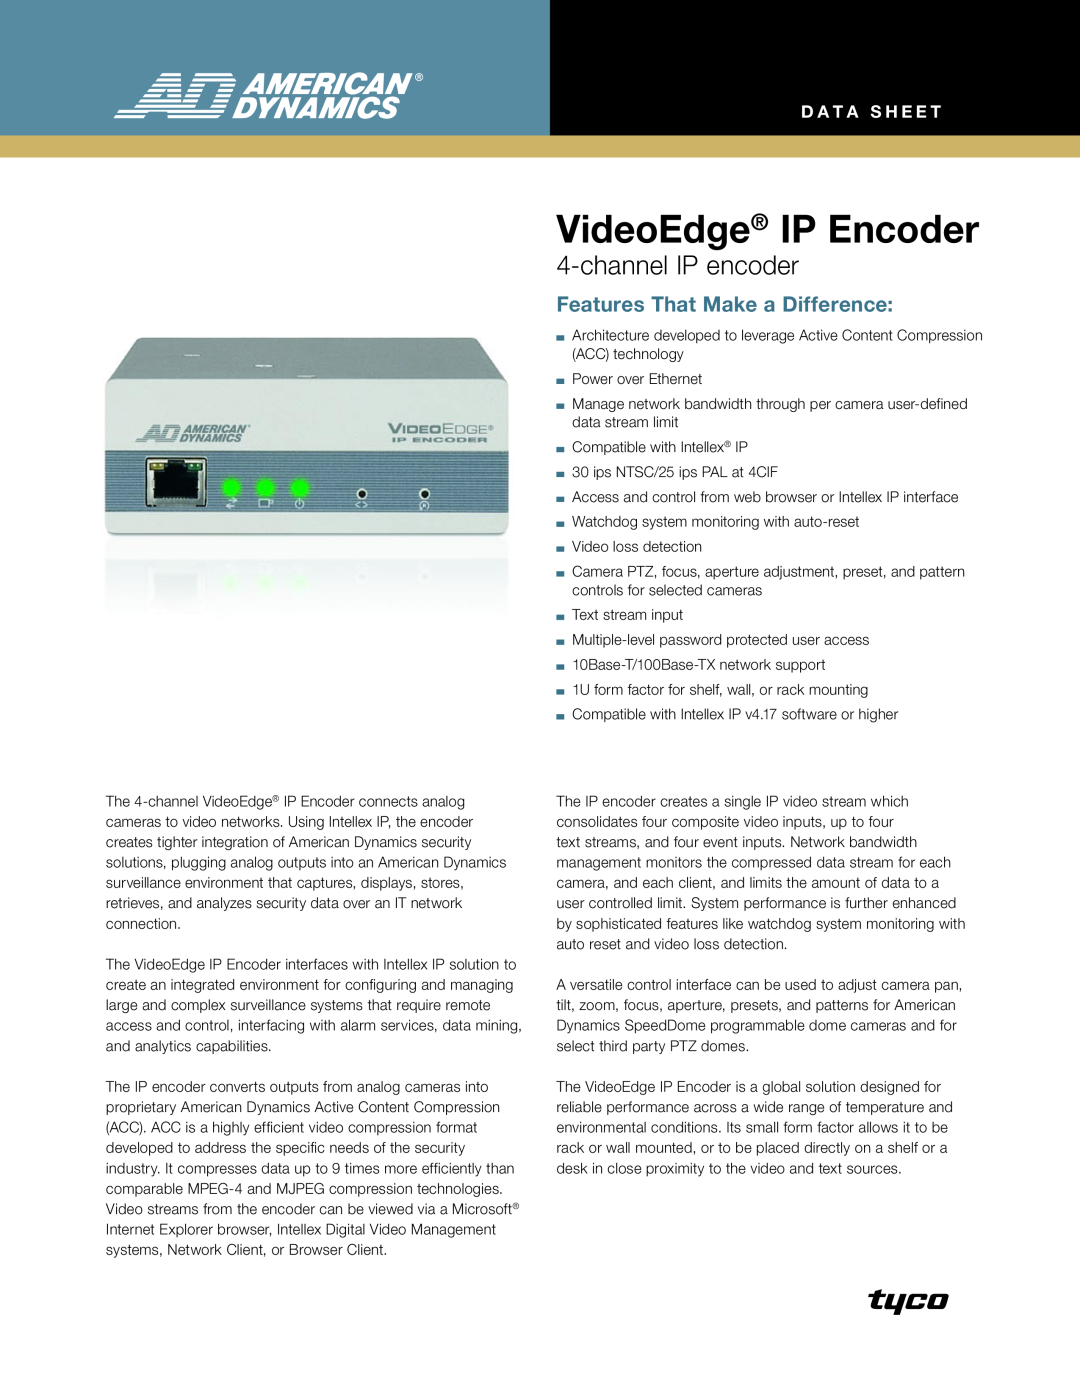 American Dynamics manual D A T a s h e e t, VideoEdge IP Encoder, channel IP encoder, Features That Make a Difference 